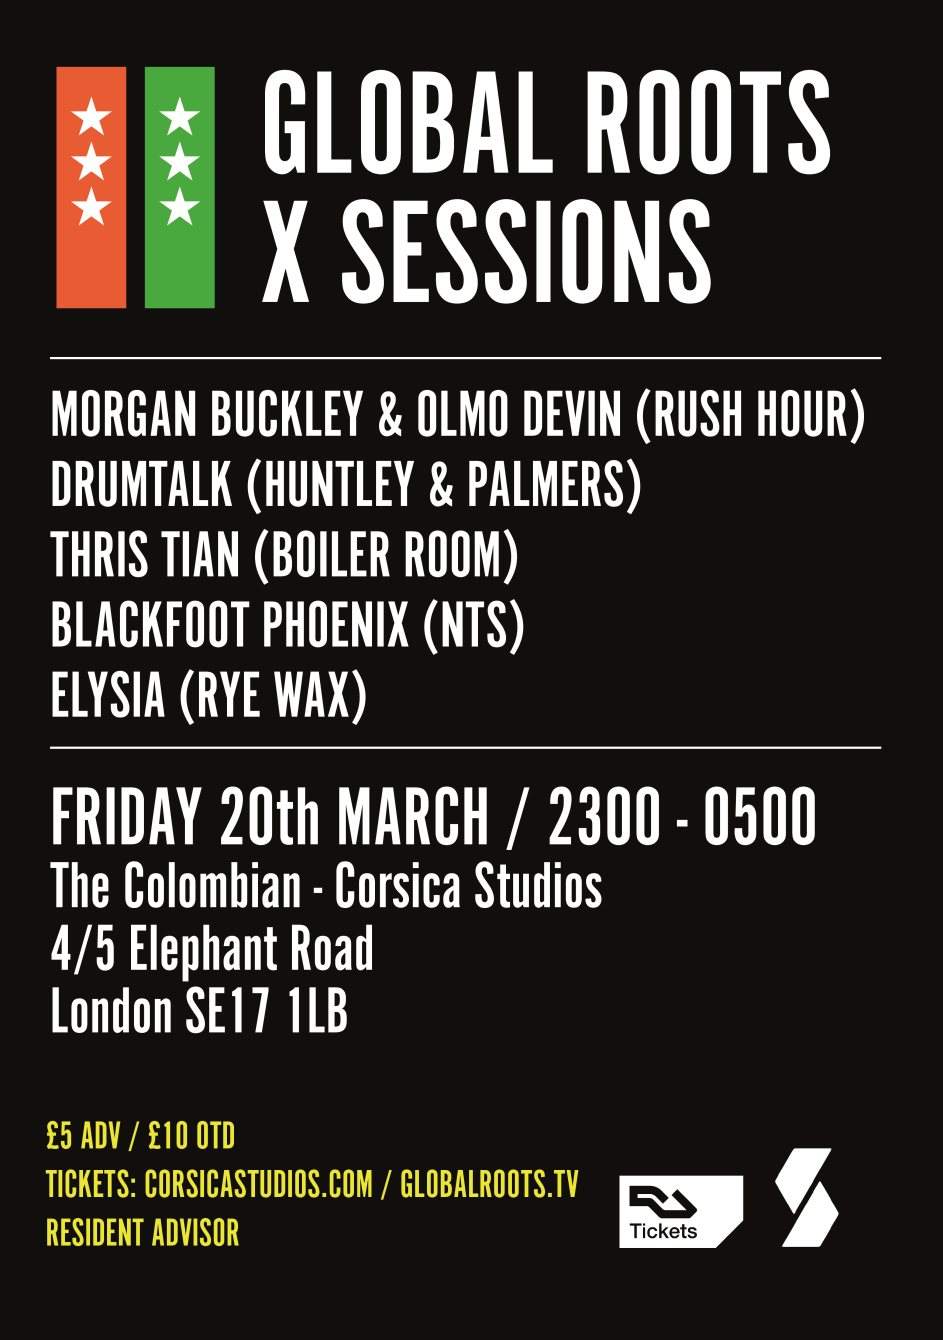 Global Roots x Sessions with Morgan Buckley & OD, Drumtalk, Thris Tian & More - フライヤー表